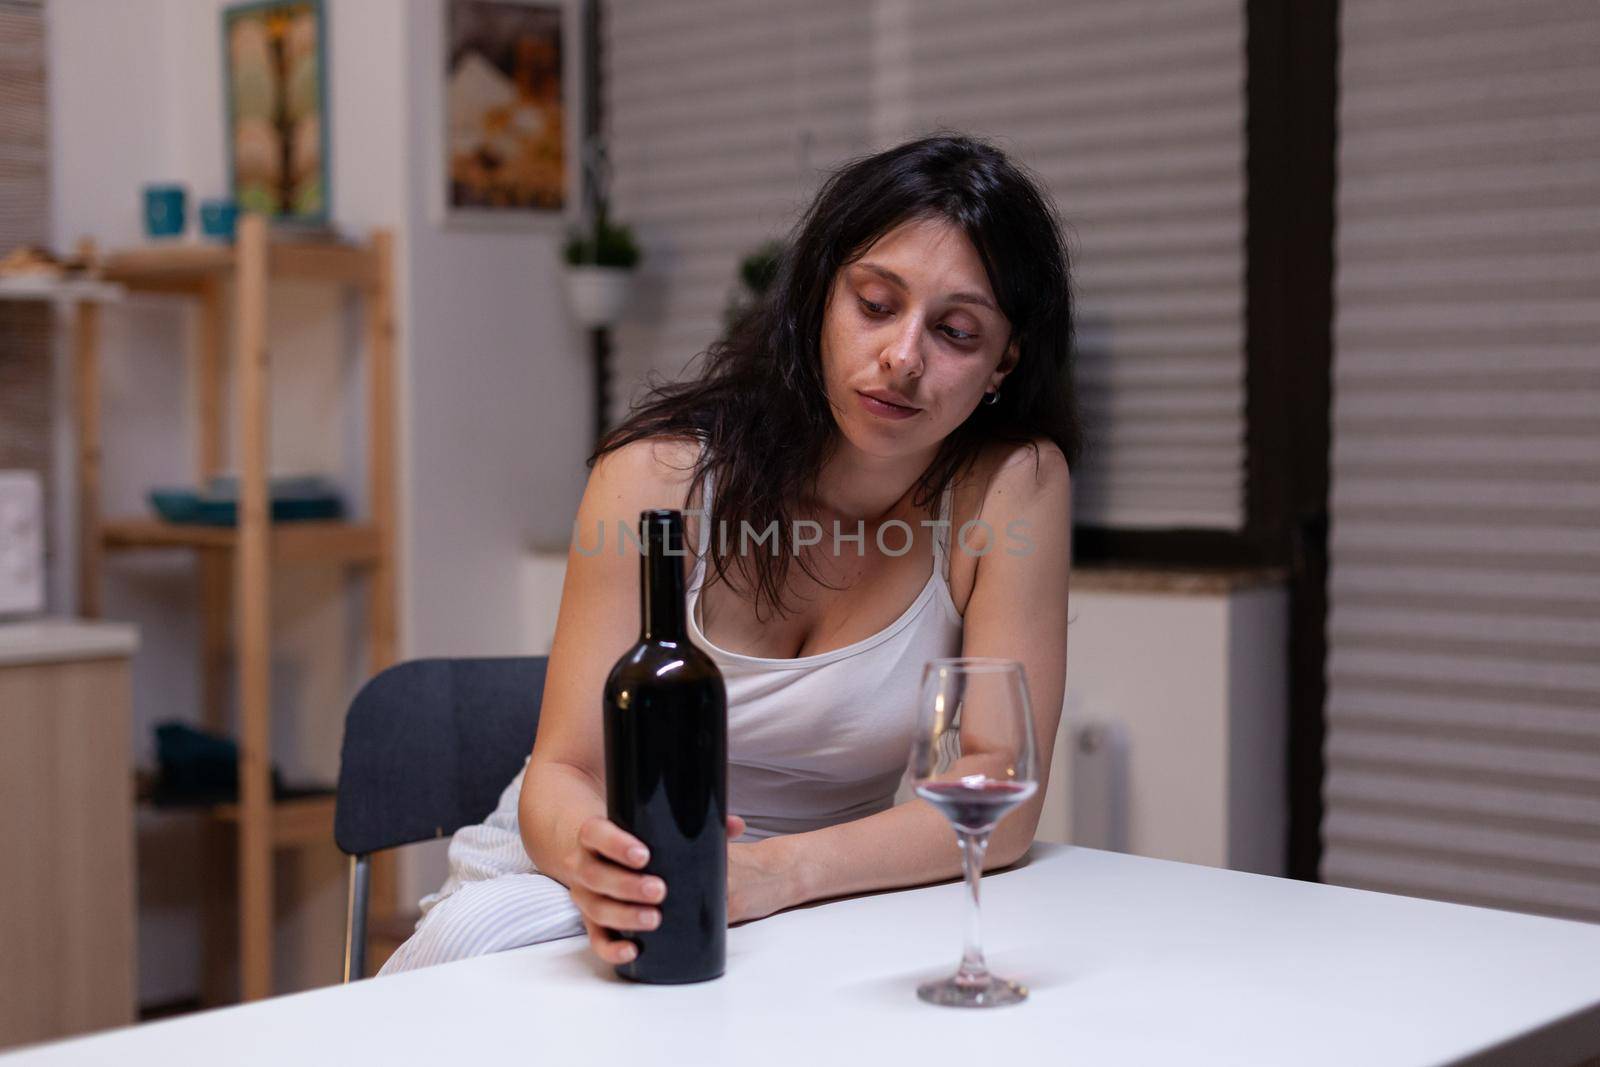 Unhappy woman with alcohol addiction drinking wine alone by DCStudio